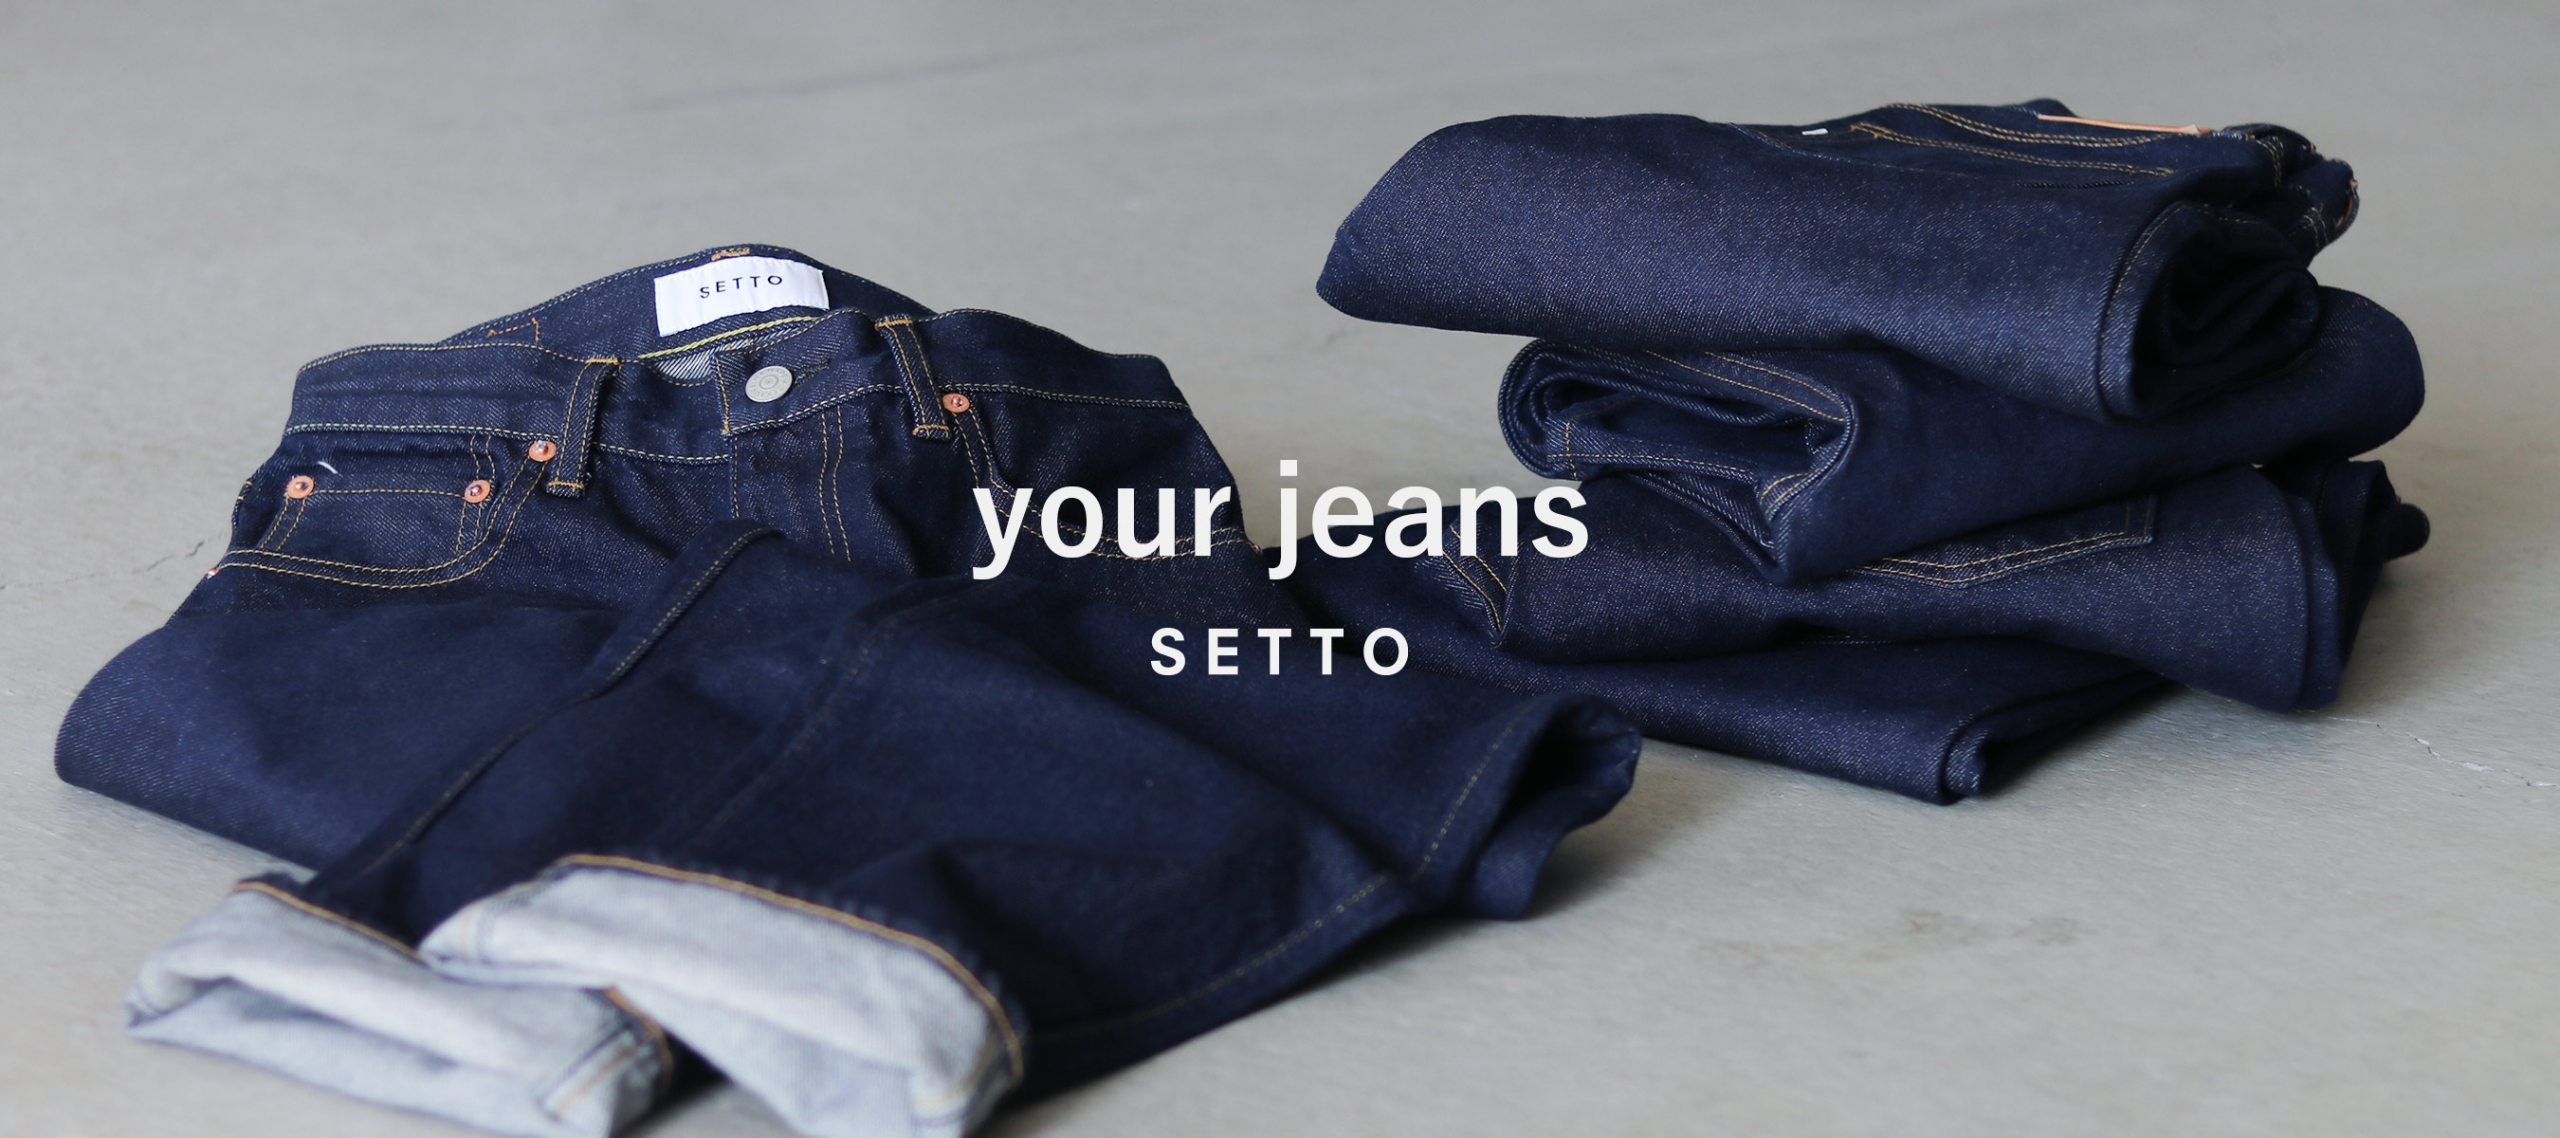 SETTO your jeans